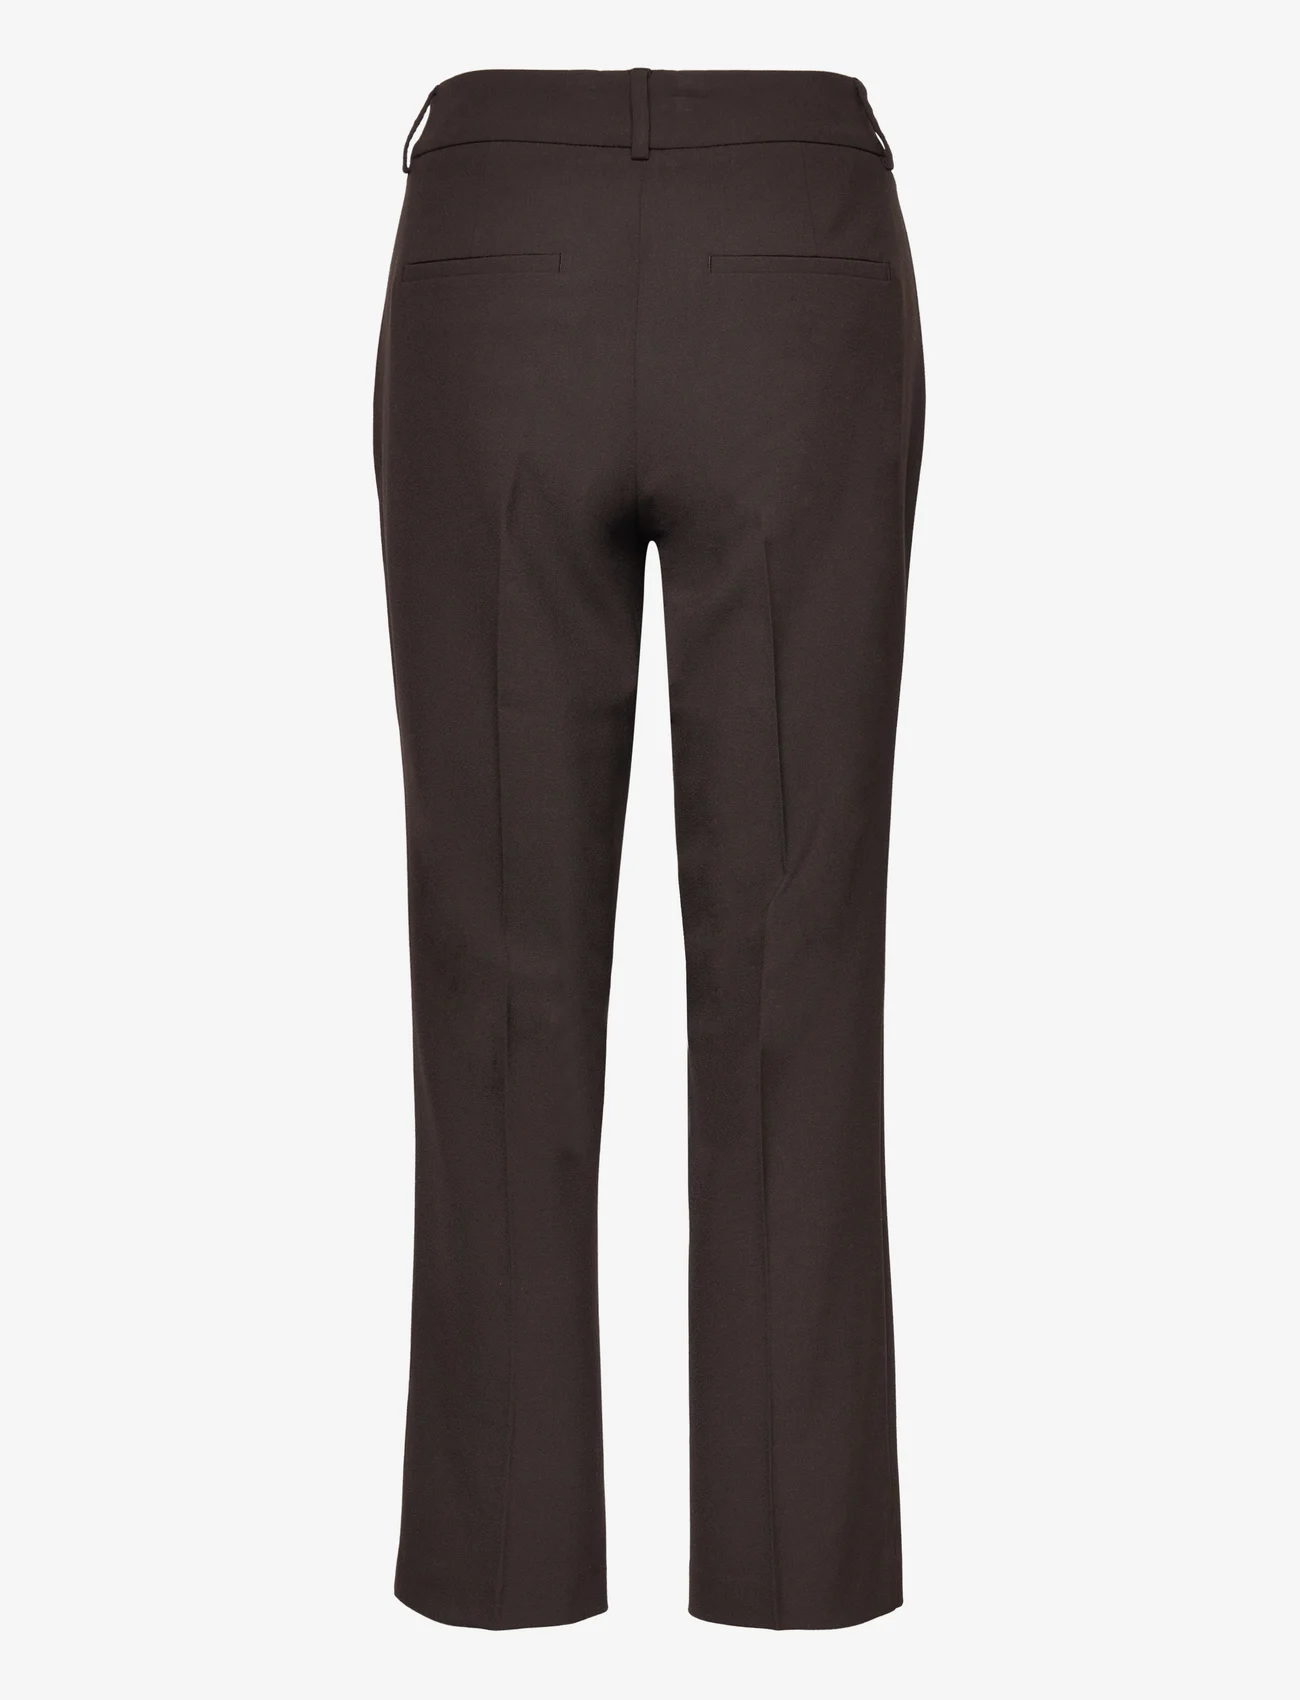 FIVEUNITS - Clara Ankle - tailored trousers - dark brown melange - 1